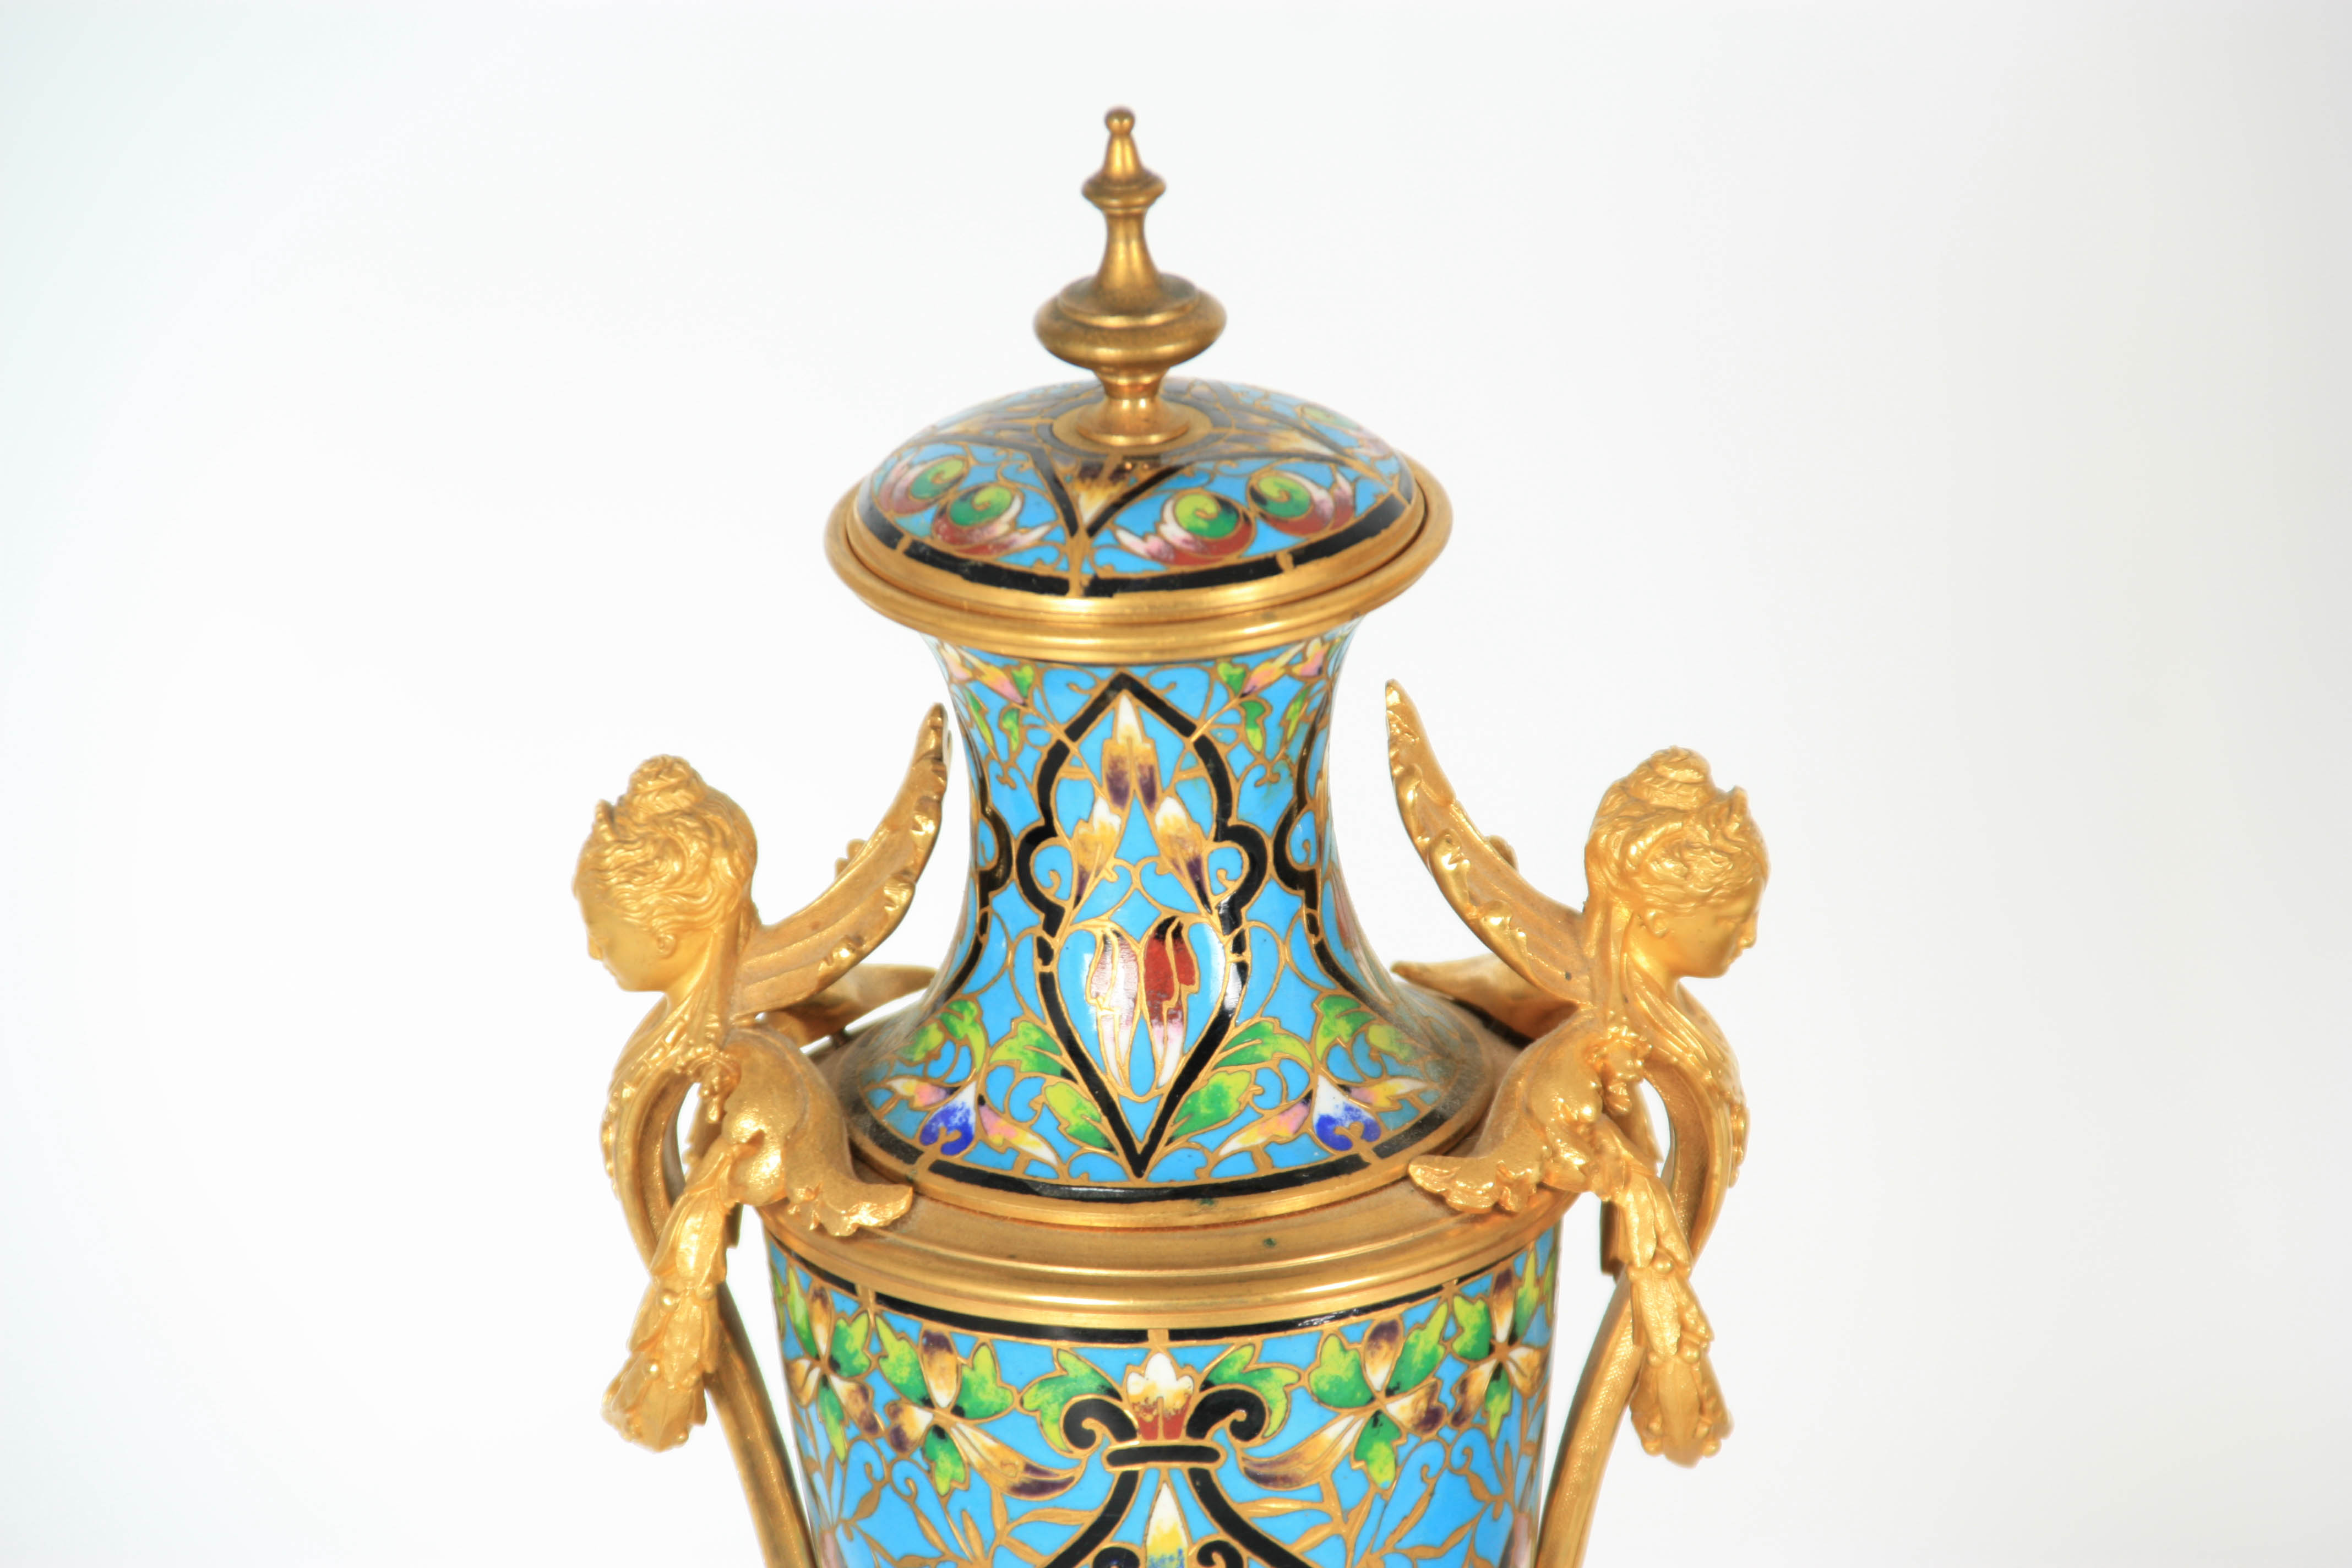 BOXHILL, BRIGHTON A LATE 19TH CENTURY FRENCH ORMOLU AND CHAMPLEVE ENAMEL CLOCK GARNITURE the four- - Image 3 of 14